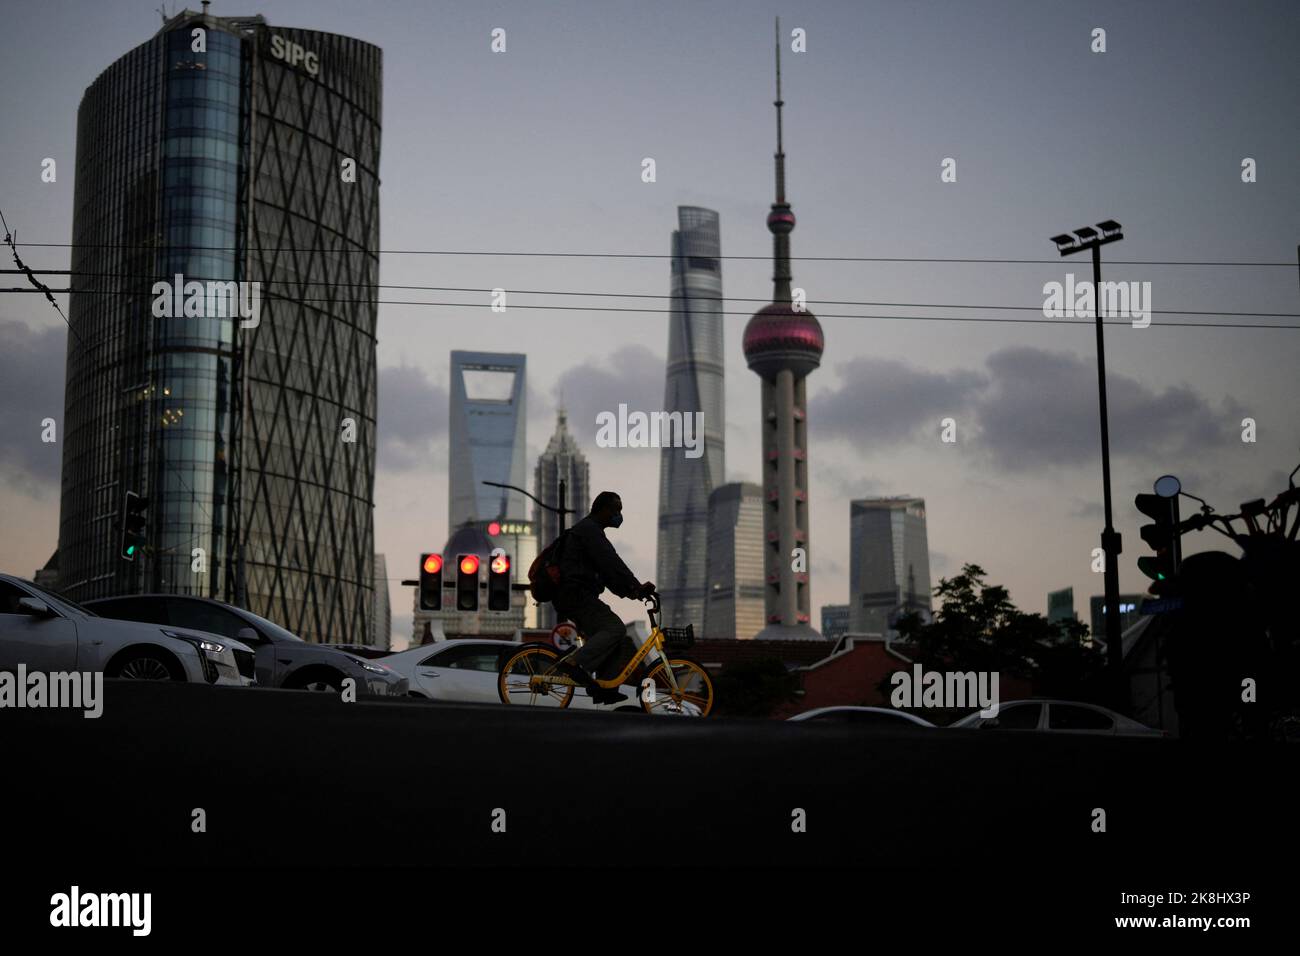 A man wearing a face mask rides a bike on a street following the coronavirus disease (COVID-19) outbreak, in Shanghai, China, October 13, 2022. REUTERS/Aly Song Stock Photo